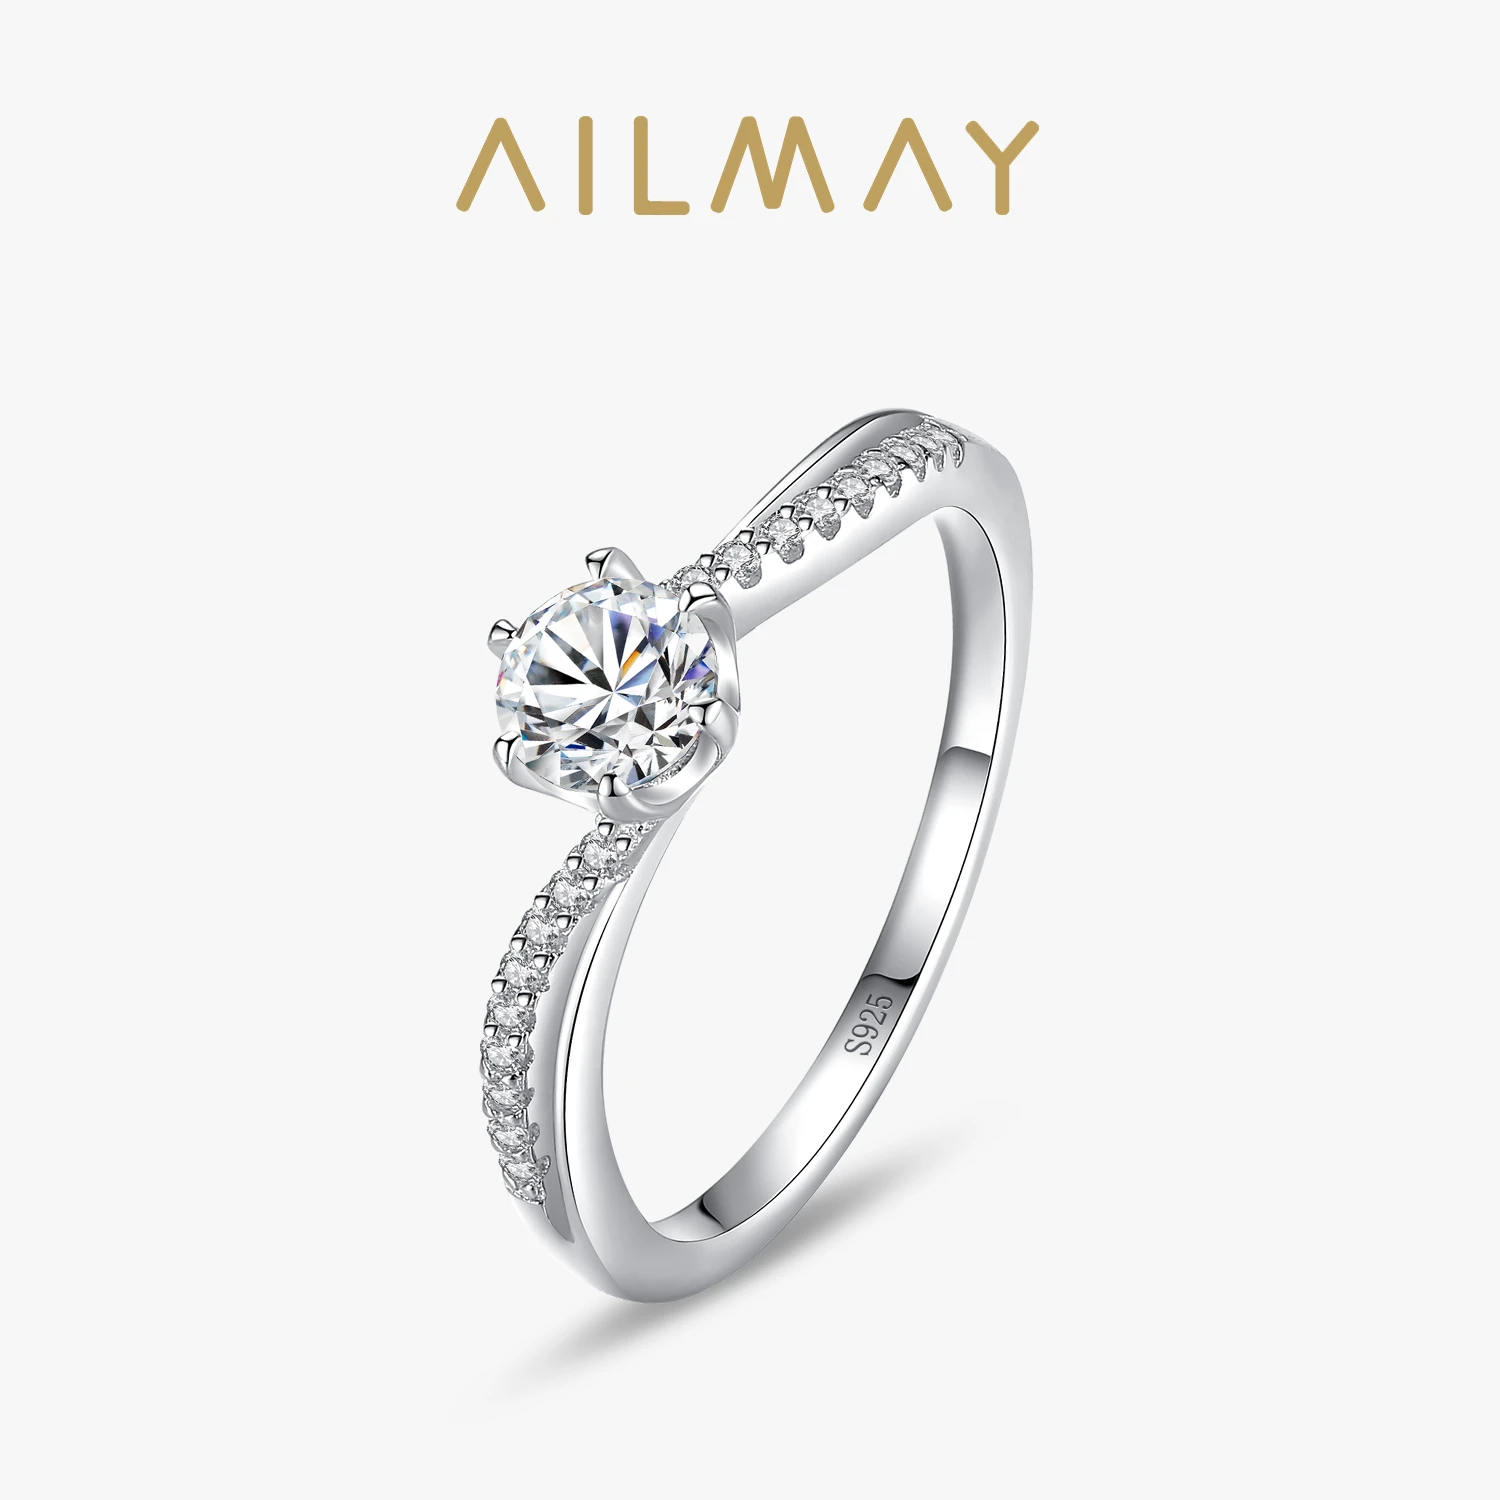 Ailmay Dazzling Sparkling Engagement Finger Rings Authentic 925 Sterling Silver Clear Zircon Rings Fine Female Fashion Jewelry